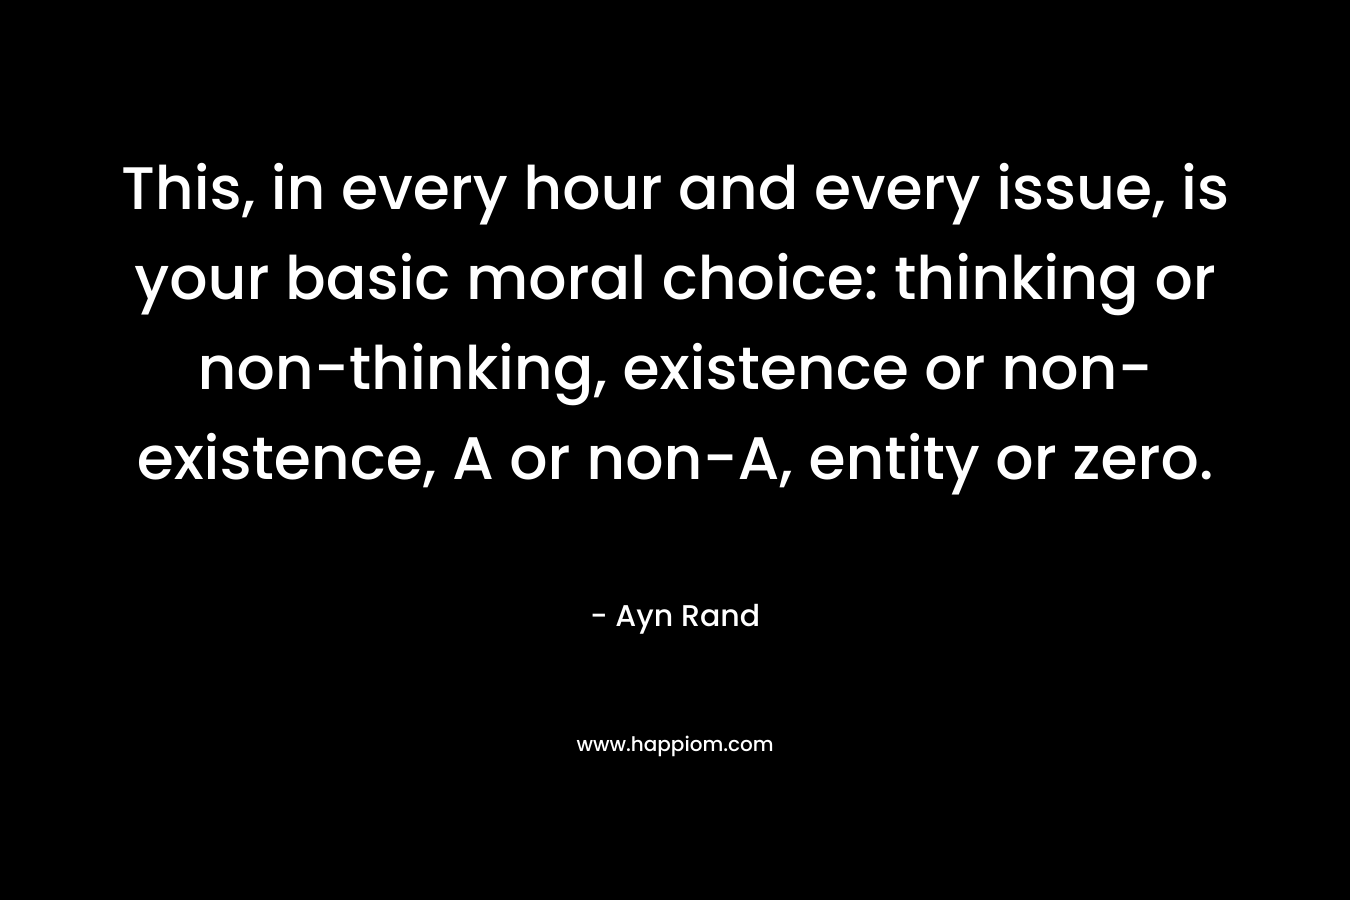 This, in every hour and every issue, is your basic moral choice: thinking or non-thinking, existence or non-existence, A or non-A, entity or zero.